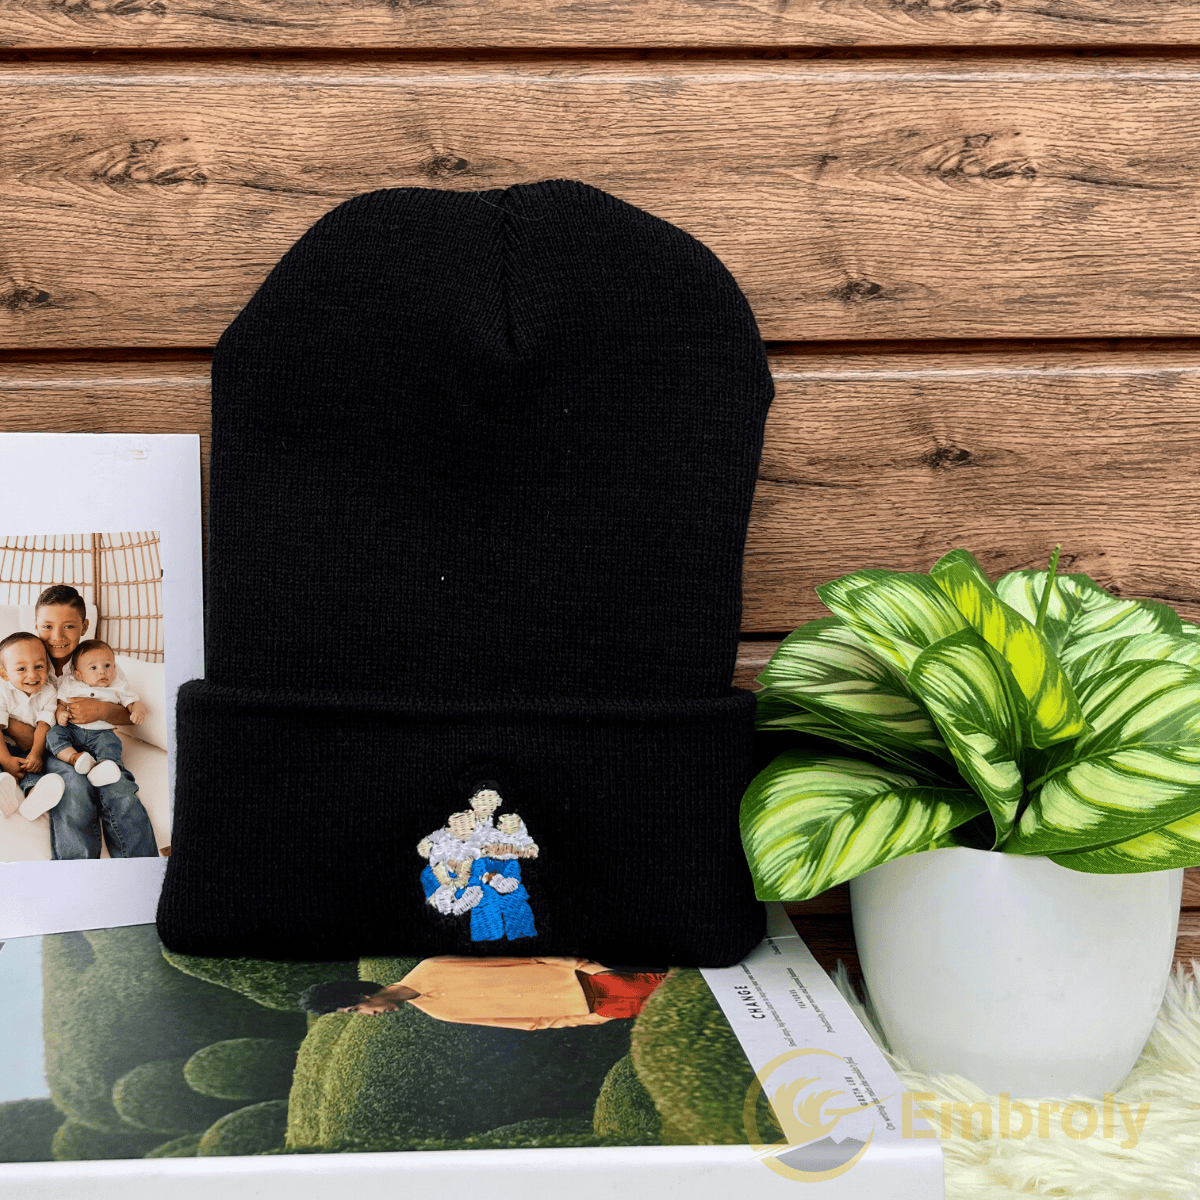 Design Your Own Beanie Hat - Photo Gifts - Custom Photo Prints - Handmade Sustainably 